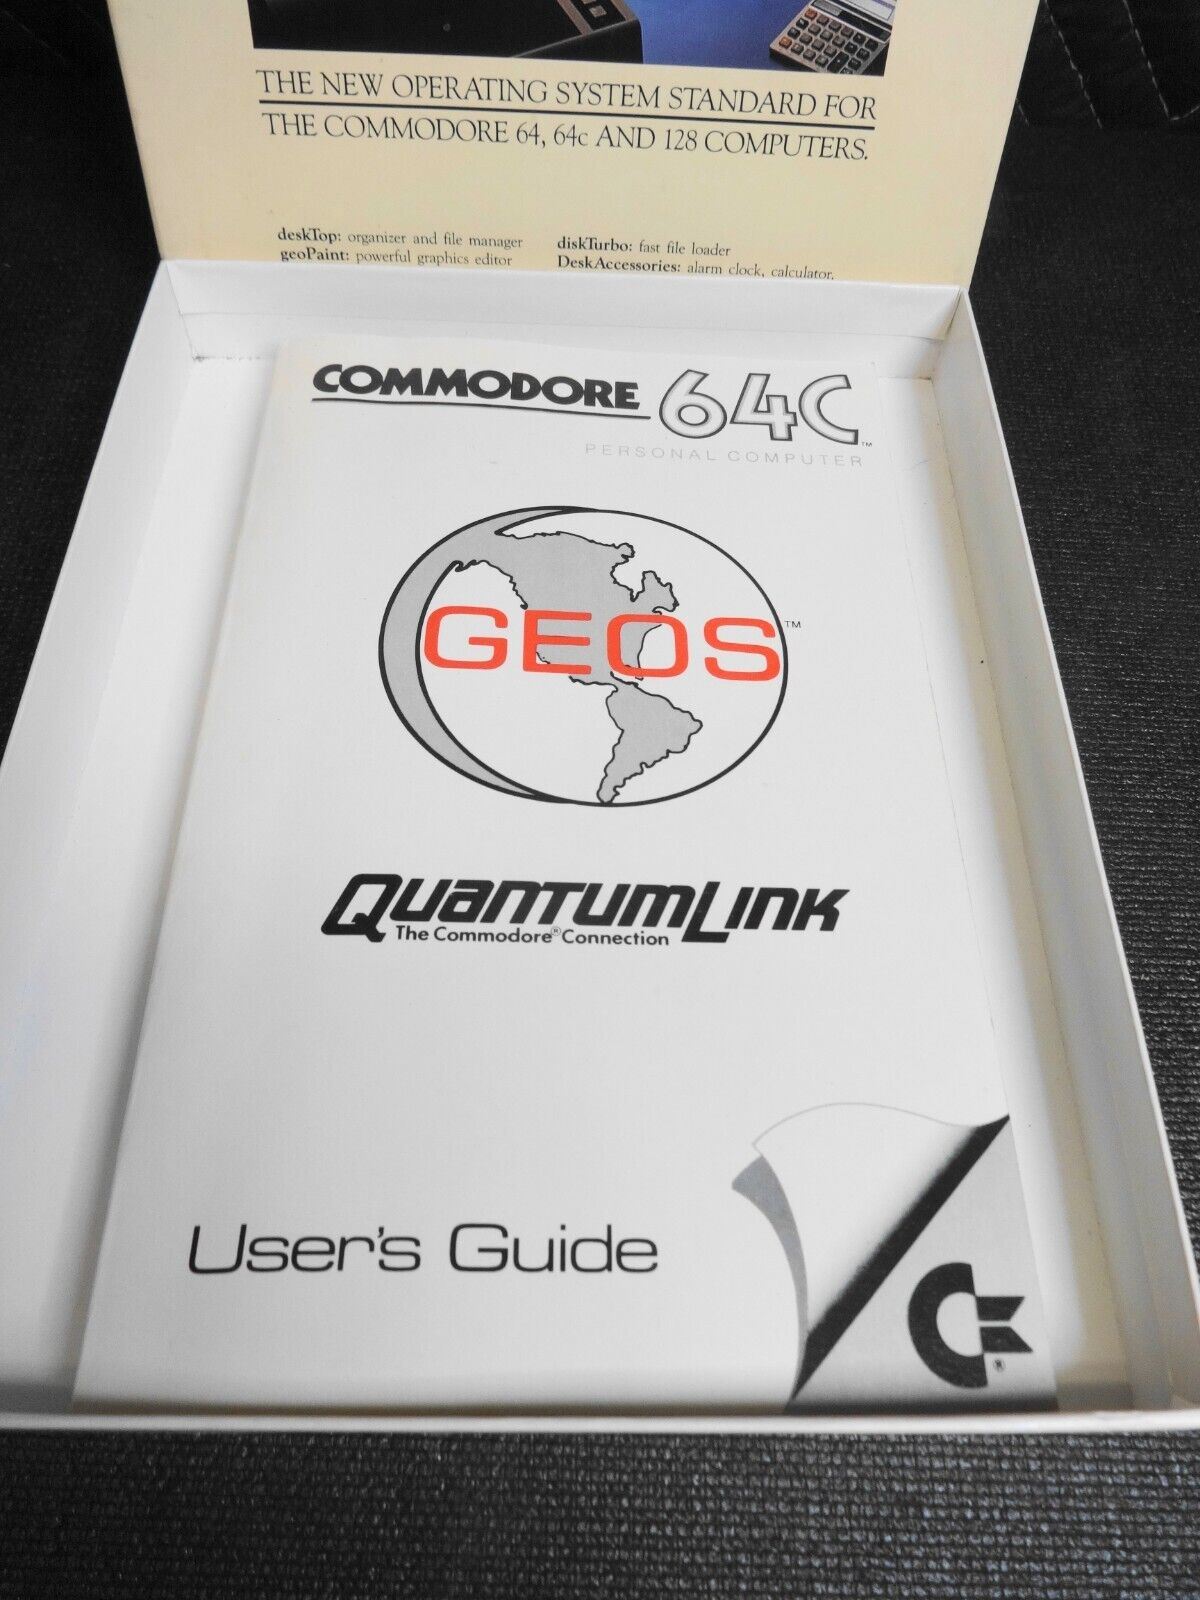 GEOS Graphic Environment Operating System For Commodore 64